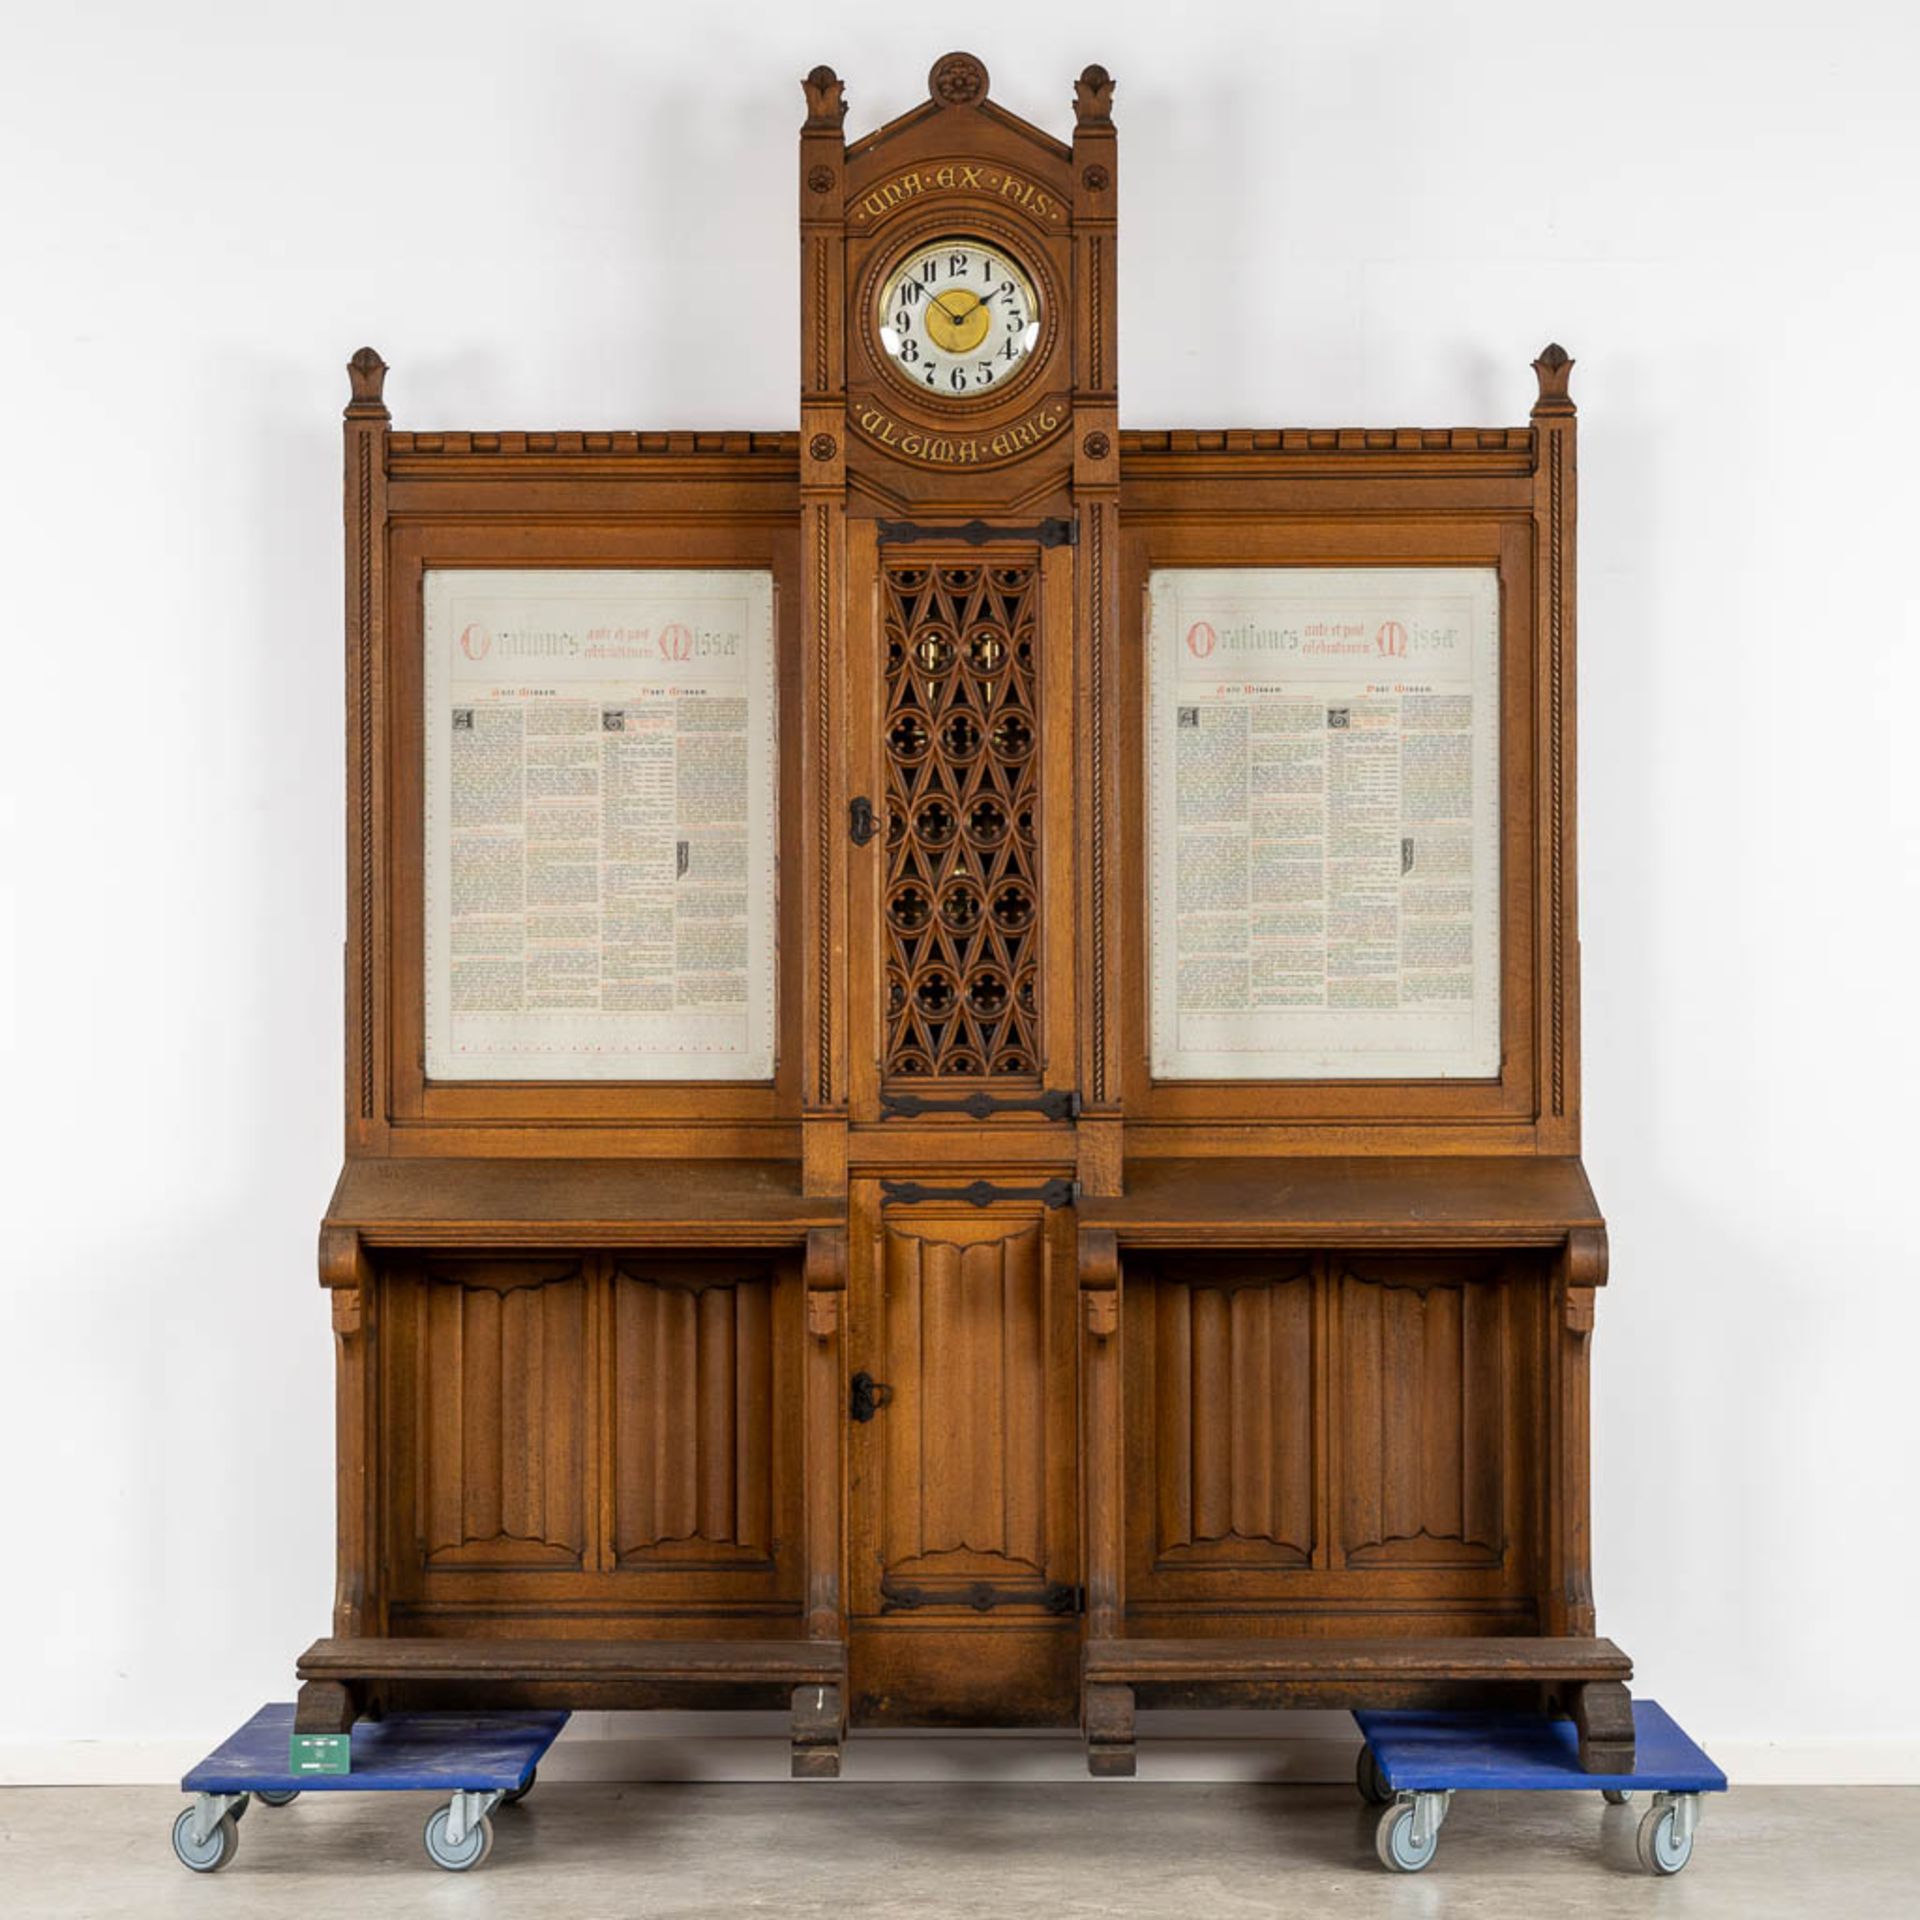 A Gotic Revival prayer bench and standing clock, Finished with Canon Boards, Oak, Circa 1900. (H:258 - Image 2 of 8